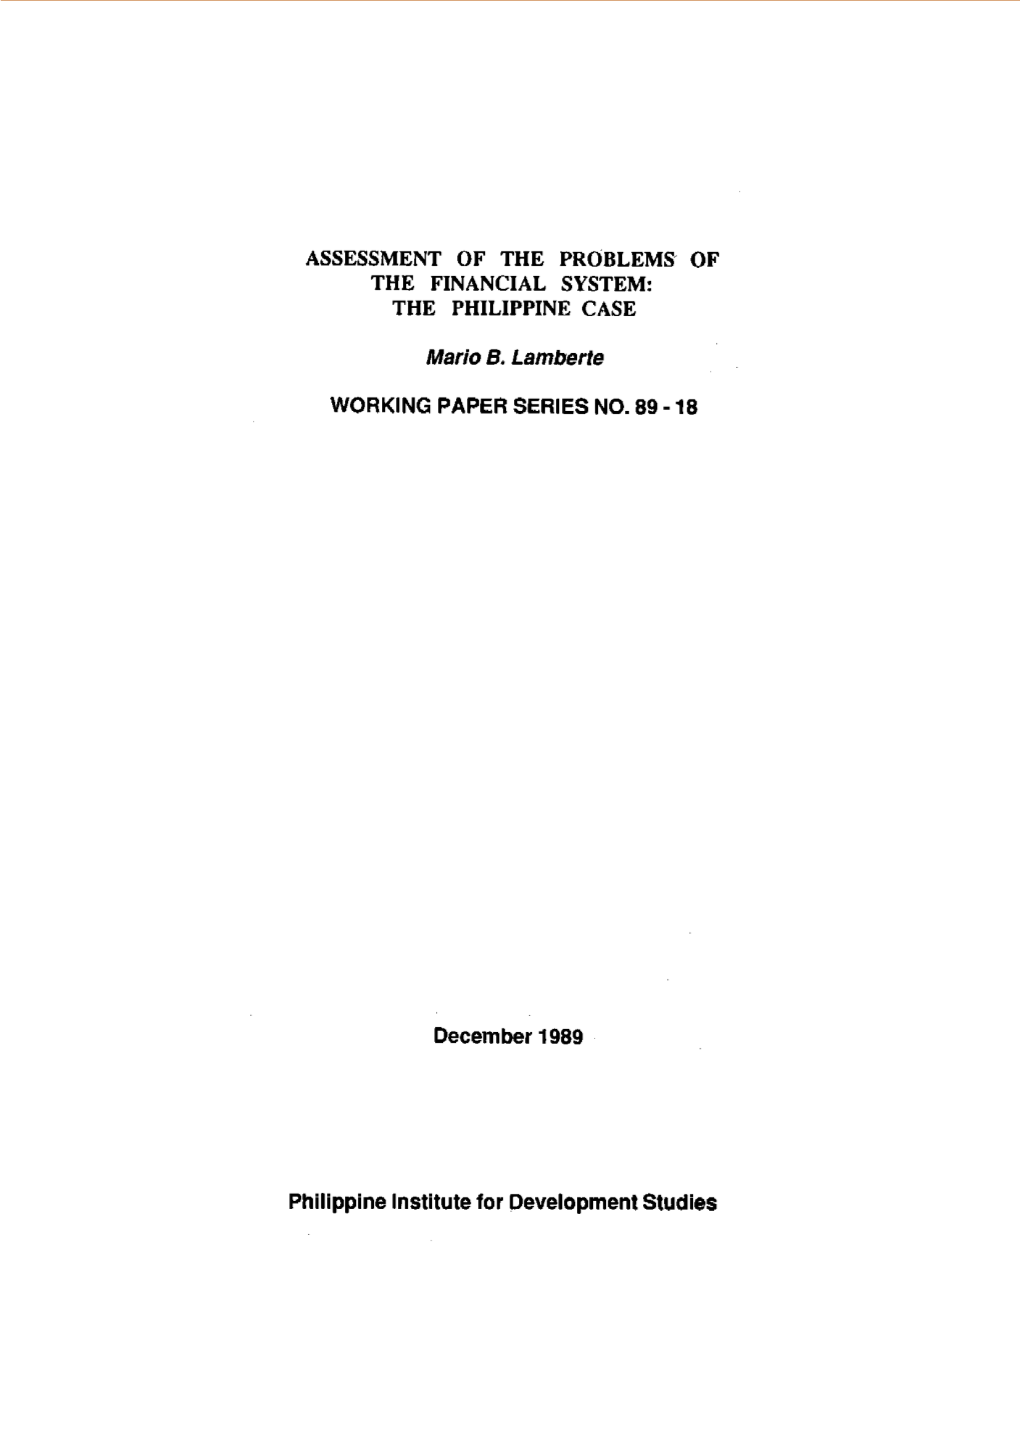 Assessment of the Problems of the Financial System: the Philippine Case